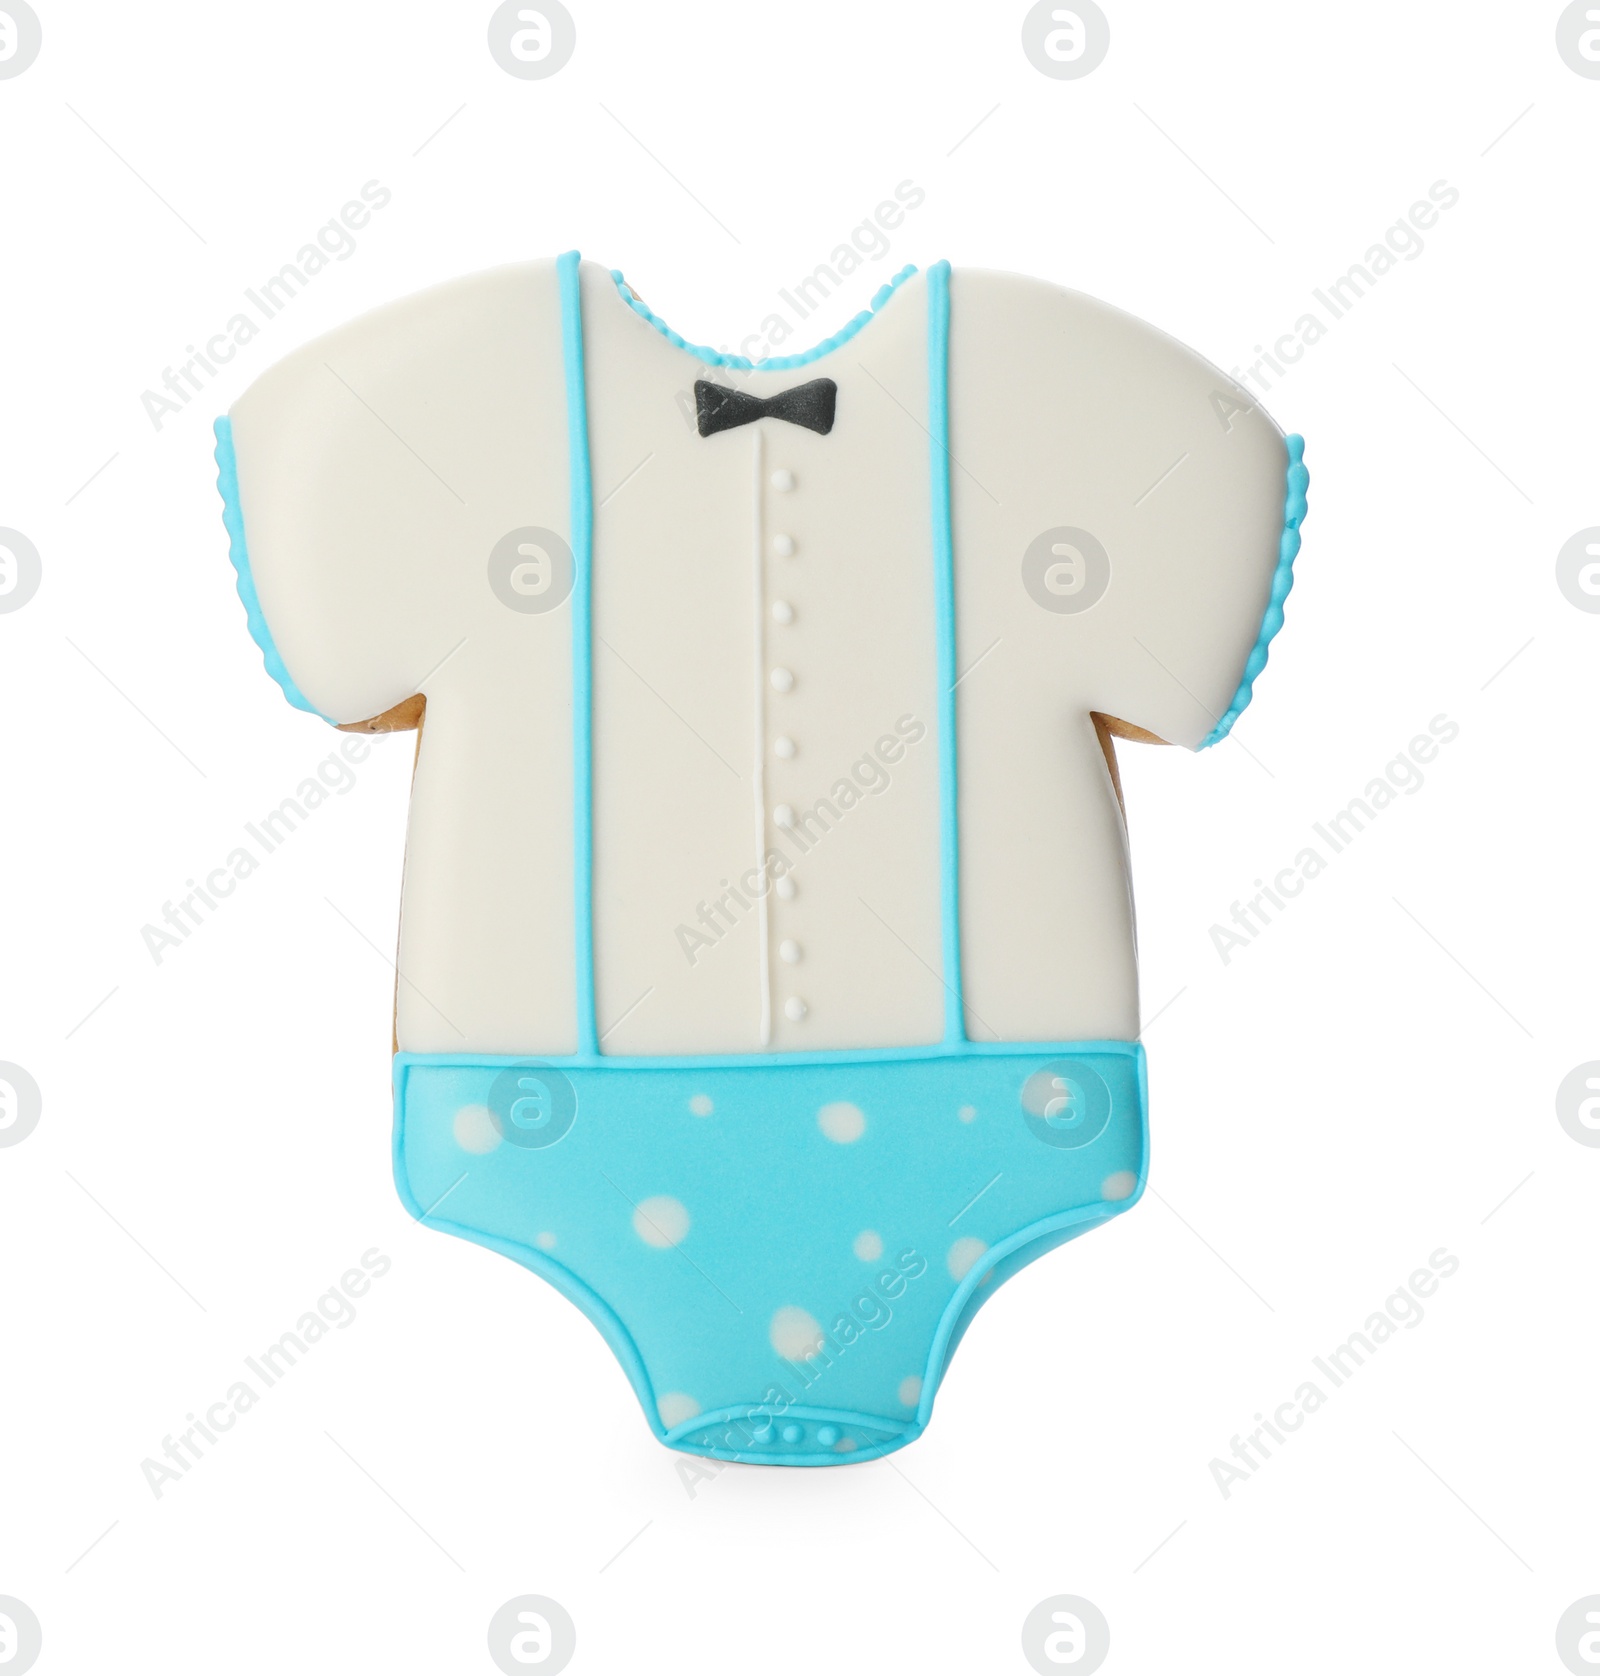 Photo of Tasty cookie in shape of baby's onesie isolated on white